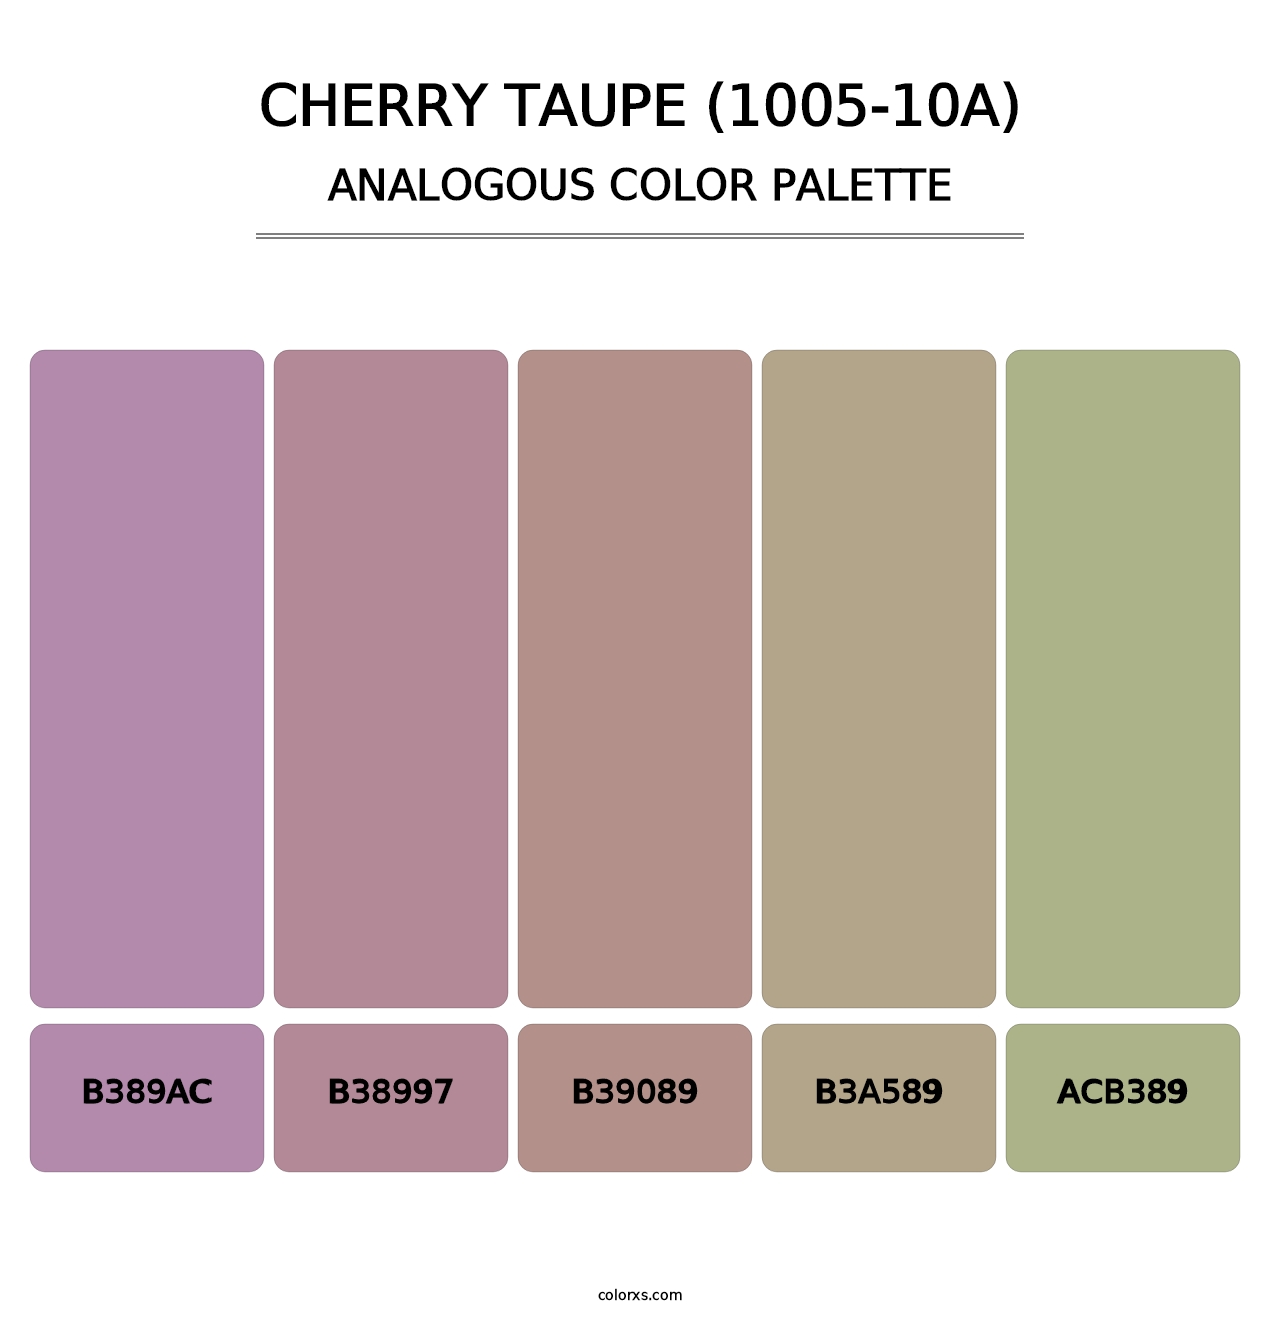 Cherry Taupe (1005-10A) - Analogous Color Palette